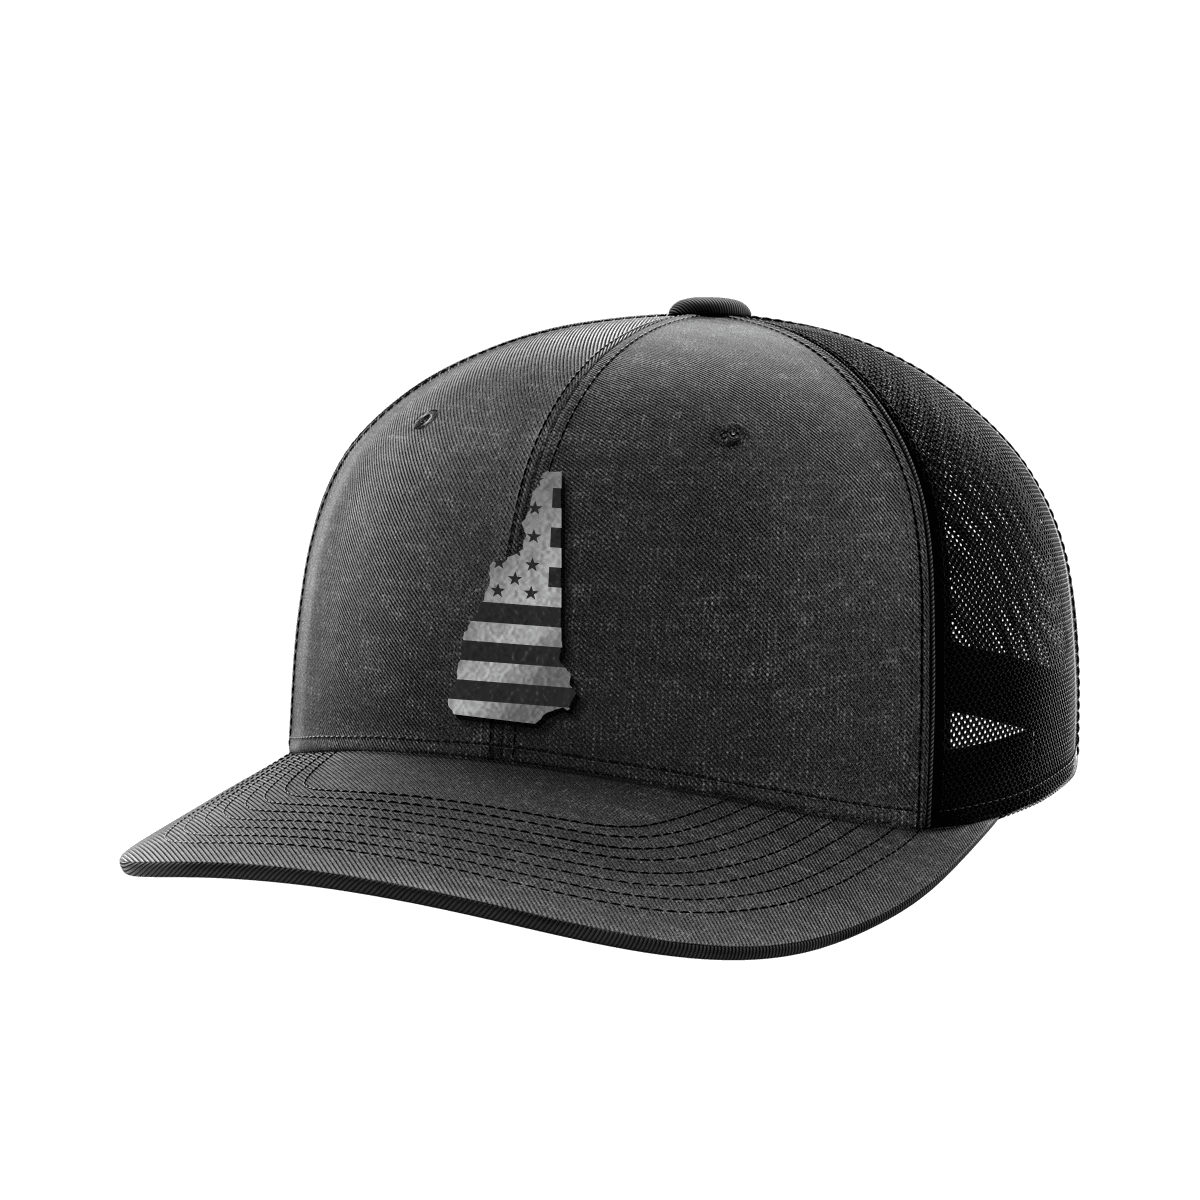 New Hampshire United Hats - Greater Half